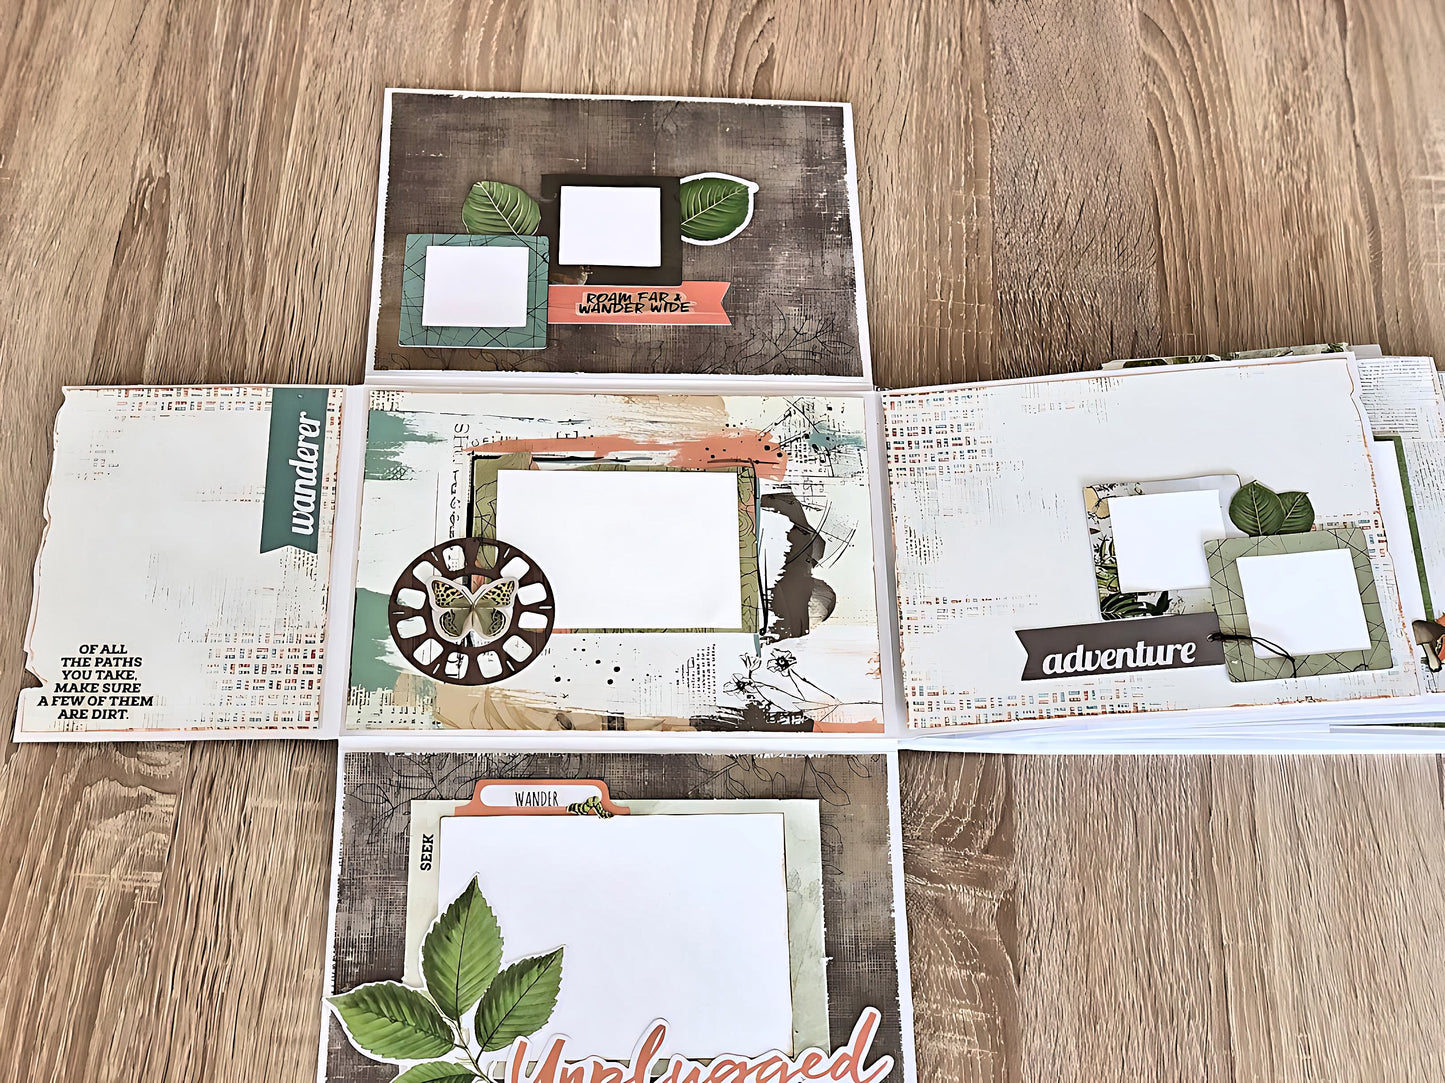 Scrapbooking Photo Album "Adventure Awaits", Interactive Photo Book with Pockets, Hiking Vacation Woods Memory Book, Gift for Creative